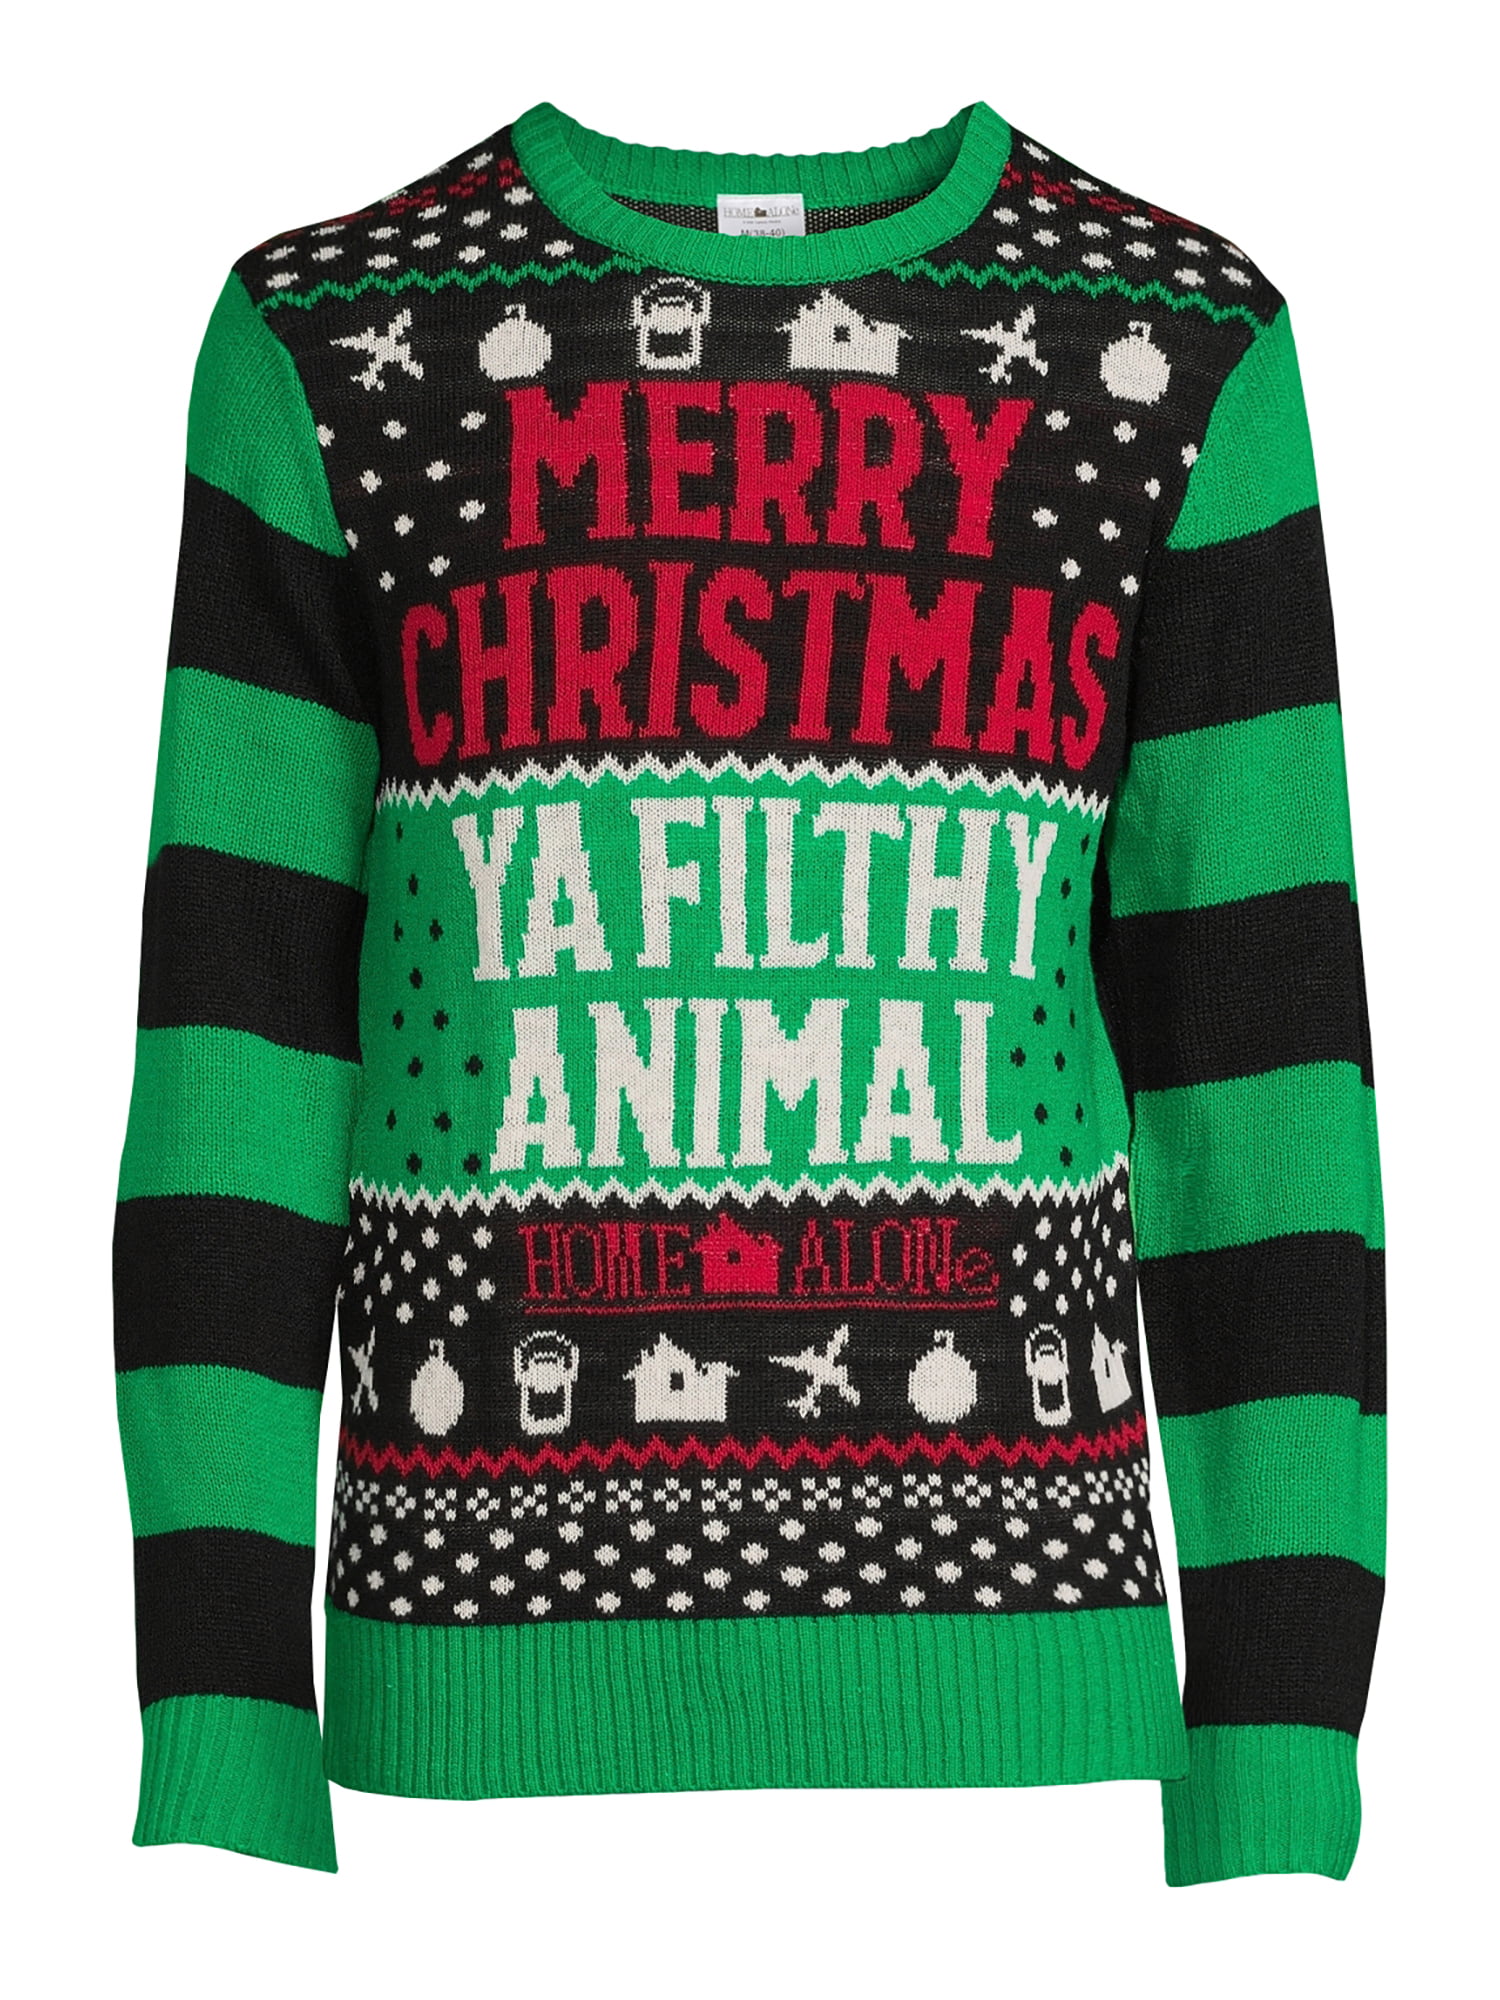 Home Alone Men's Merry Christmas Ya Filthy Animal Sweater 